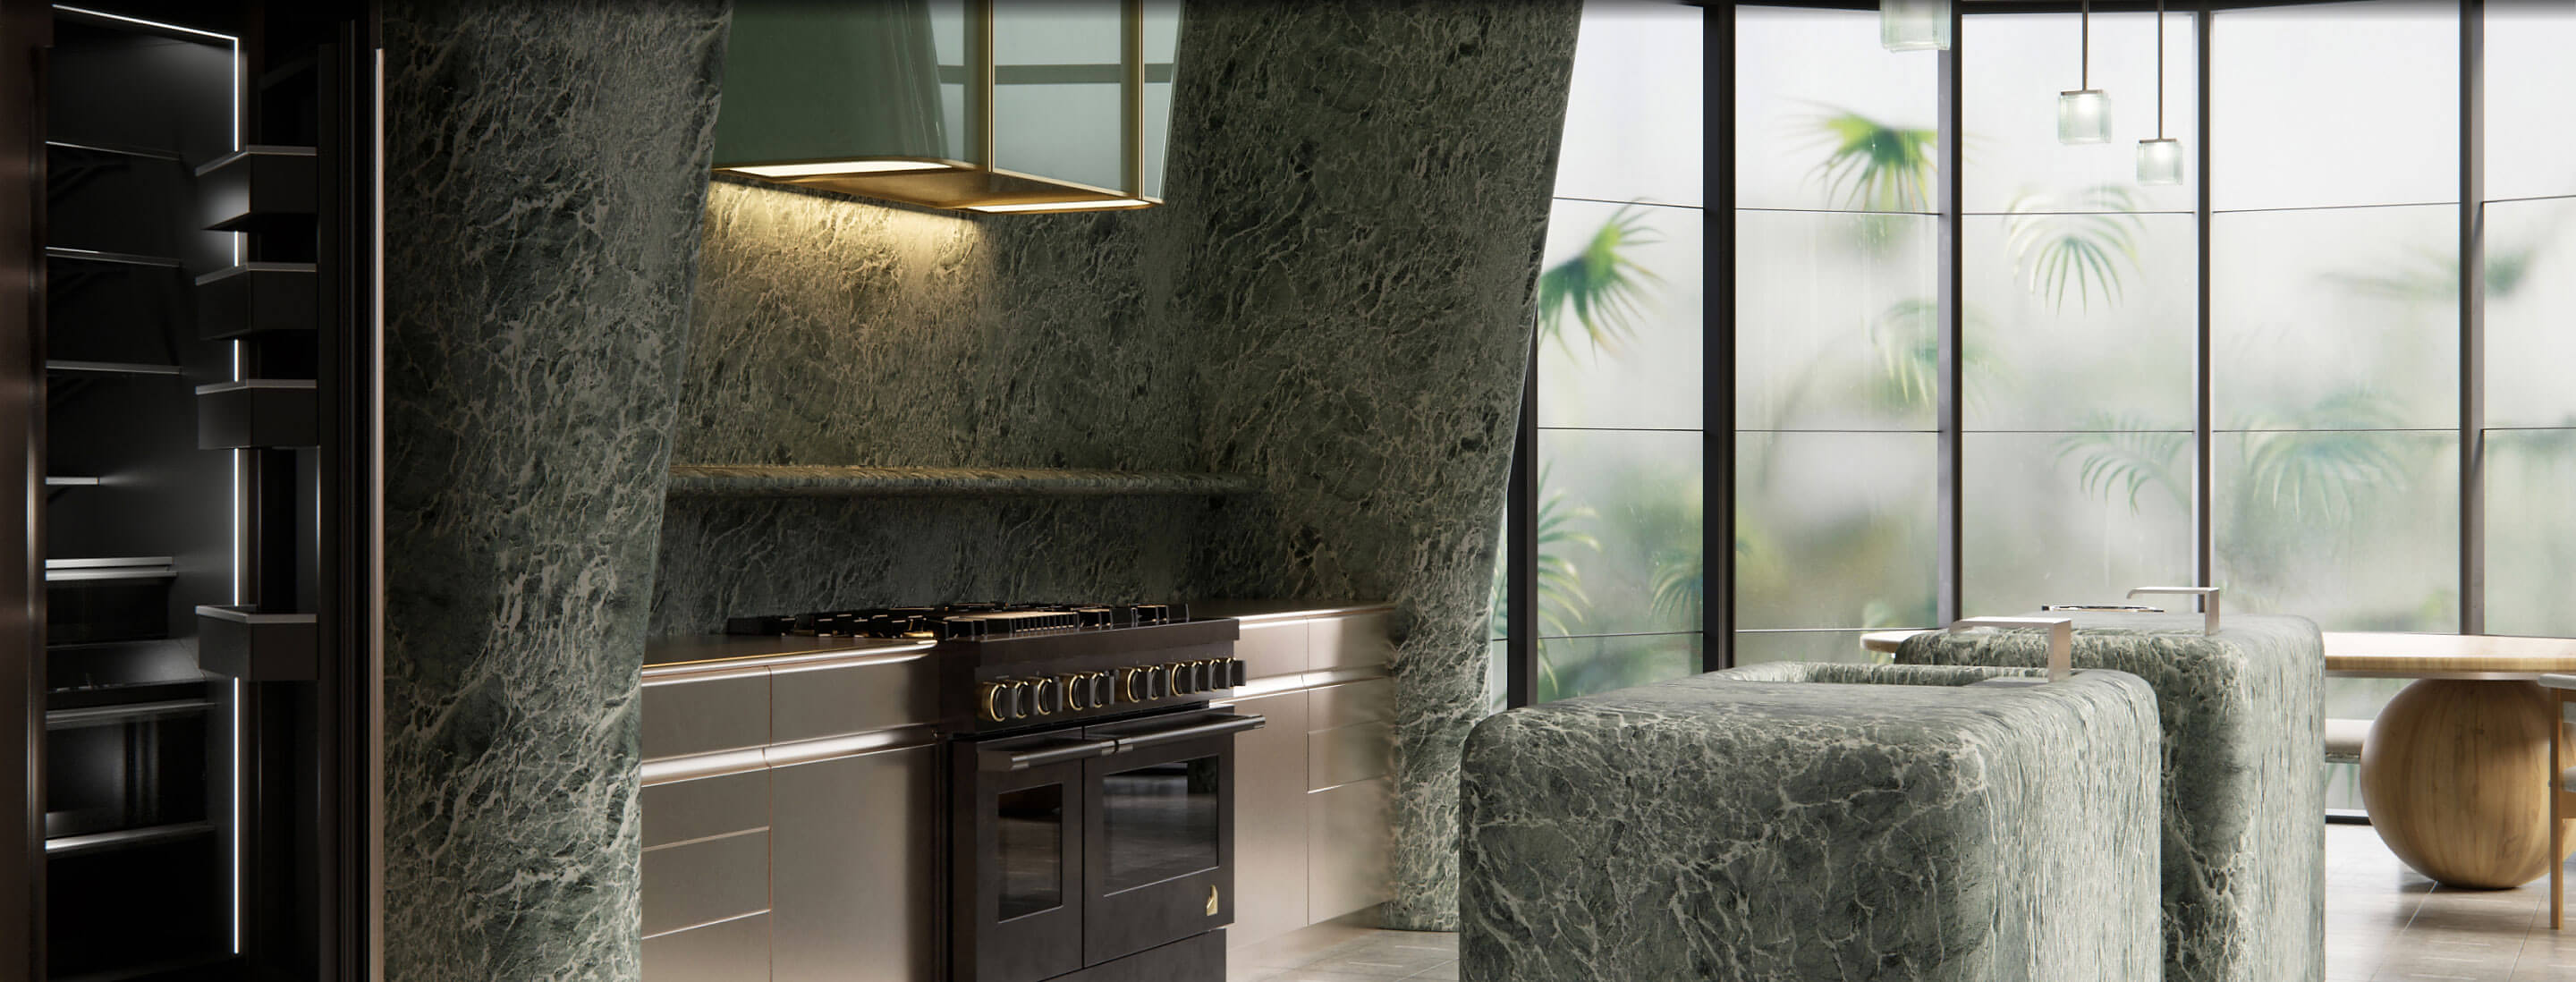 The kitchen designed by Kelly Wearstler with the JennAir® Smoke & Brass range at the center.